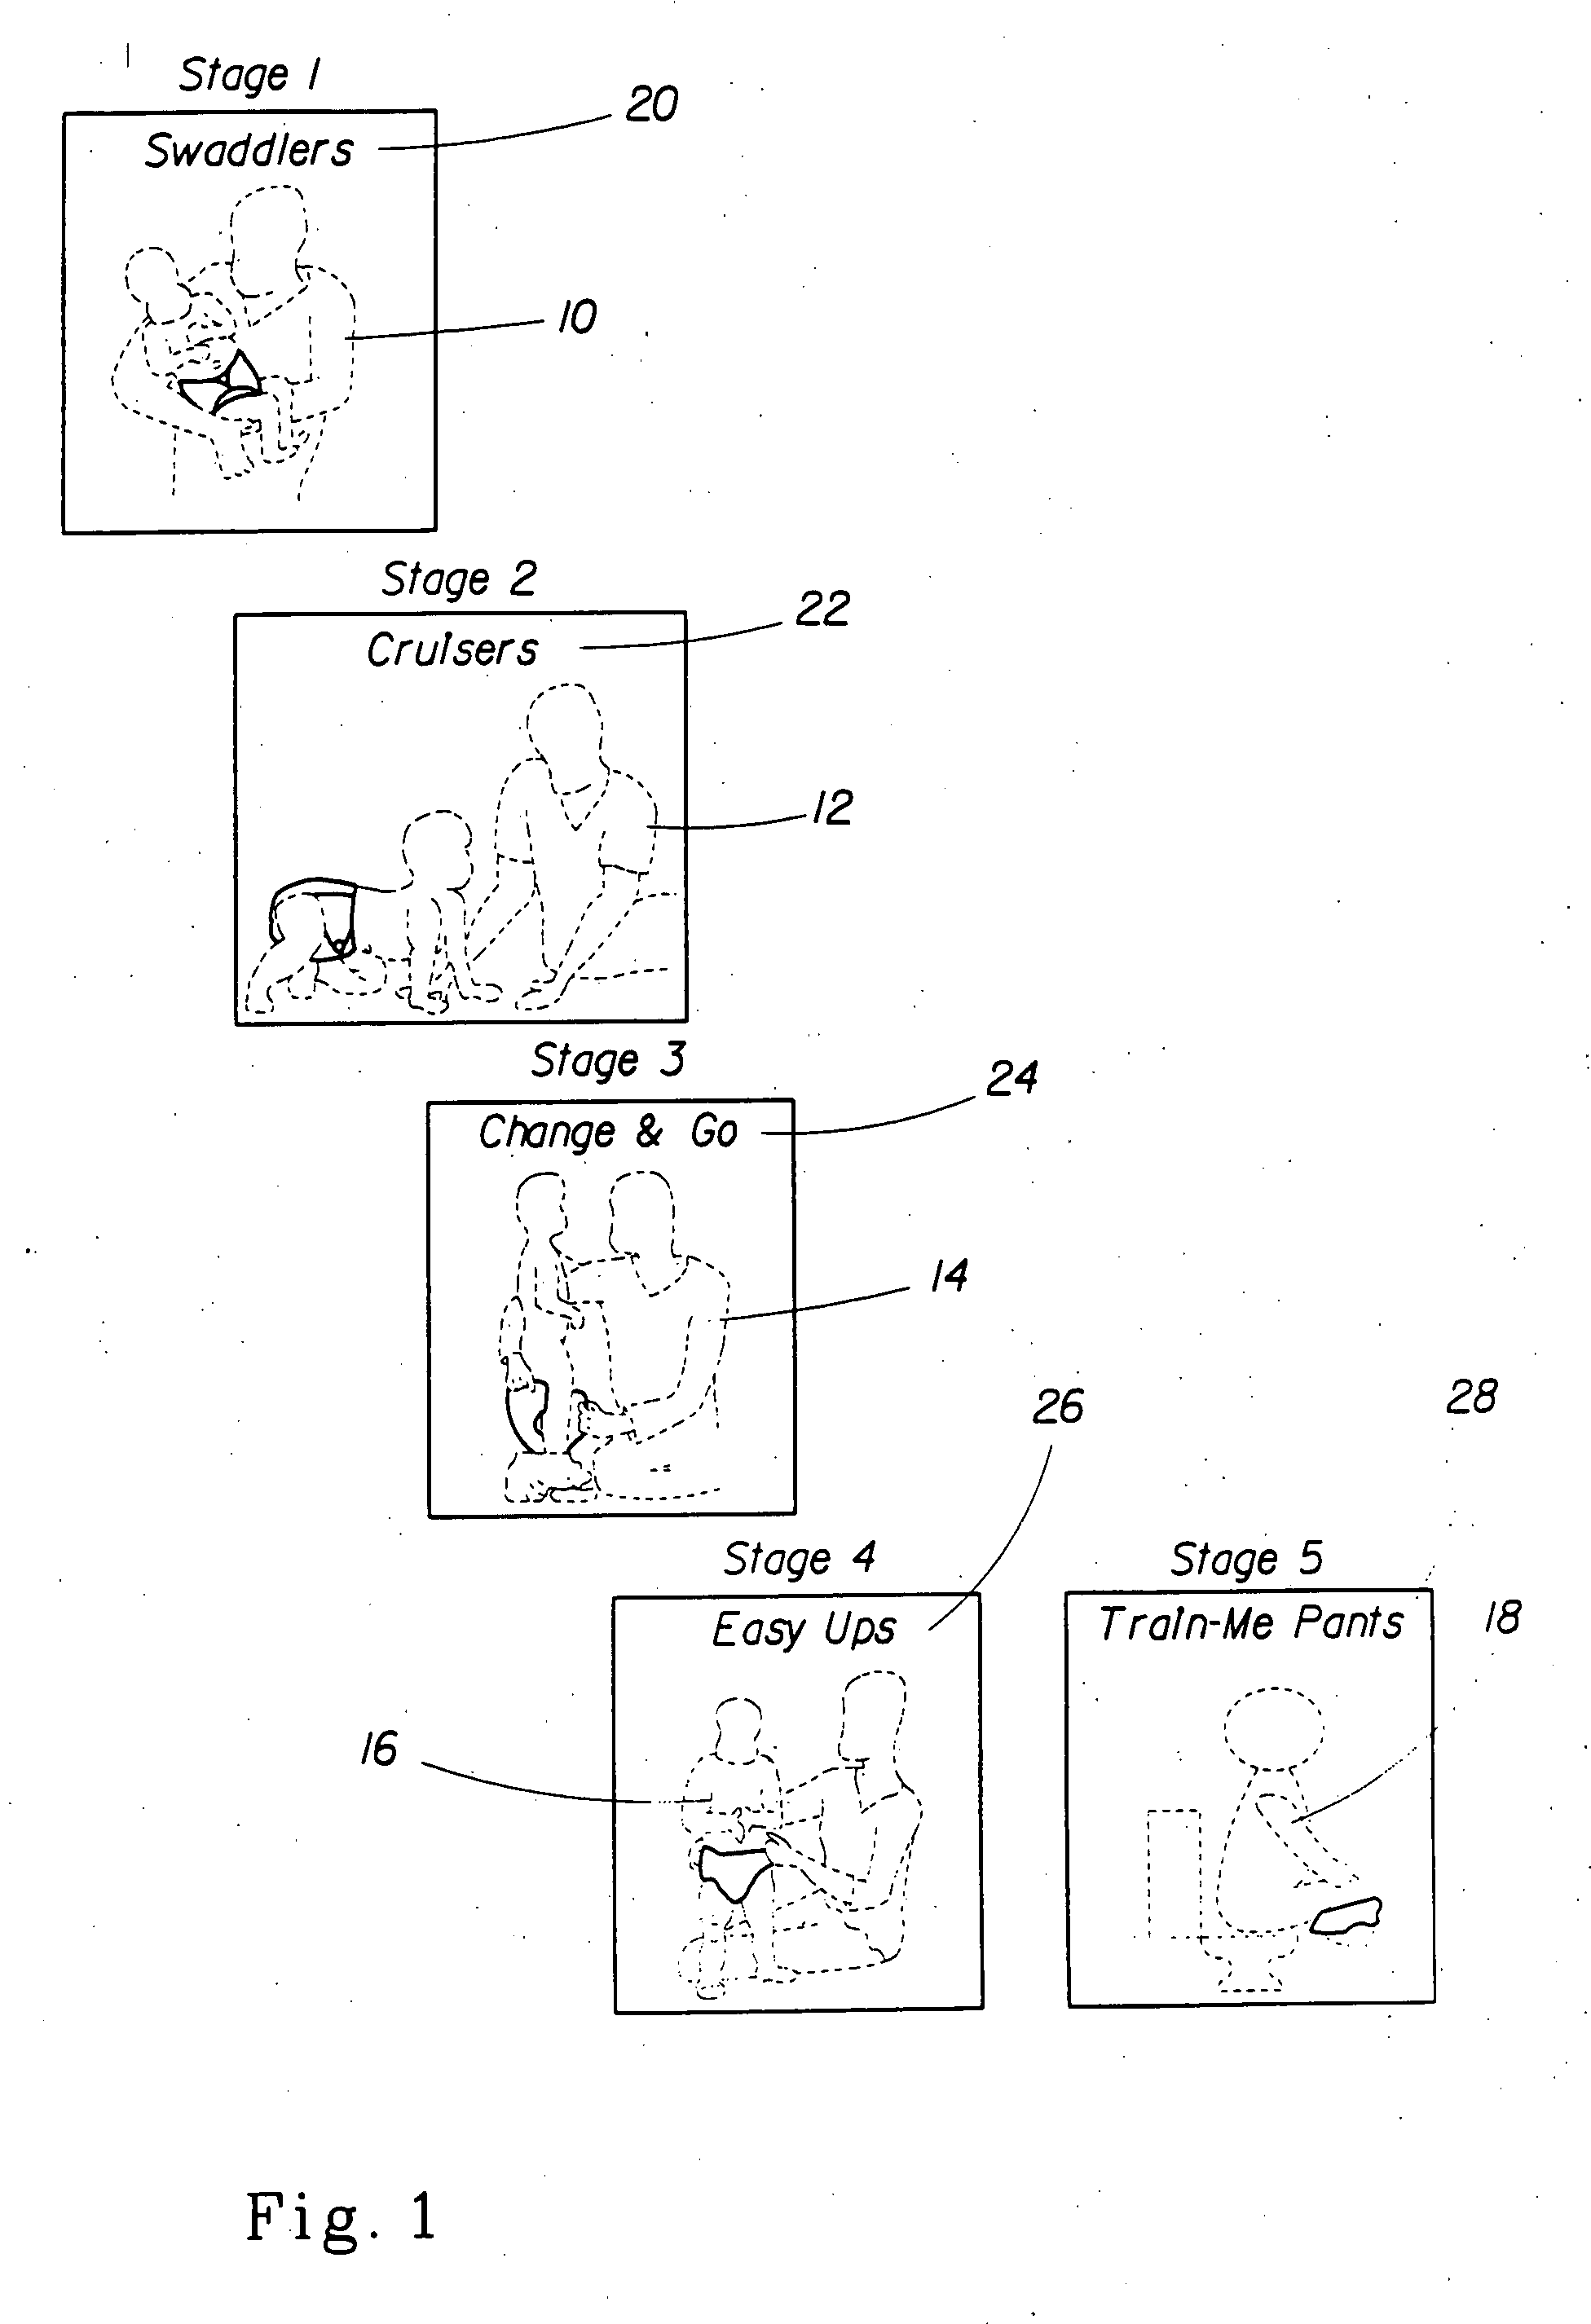 Merchandise display system for identifying disposable absorbent article configurations for wearers